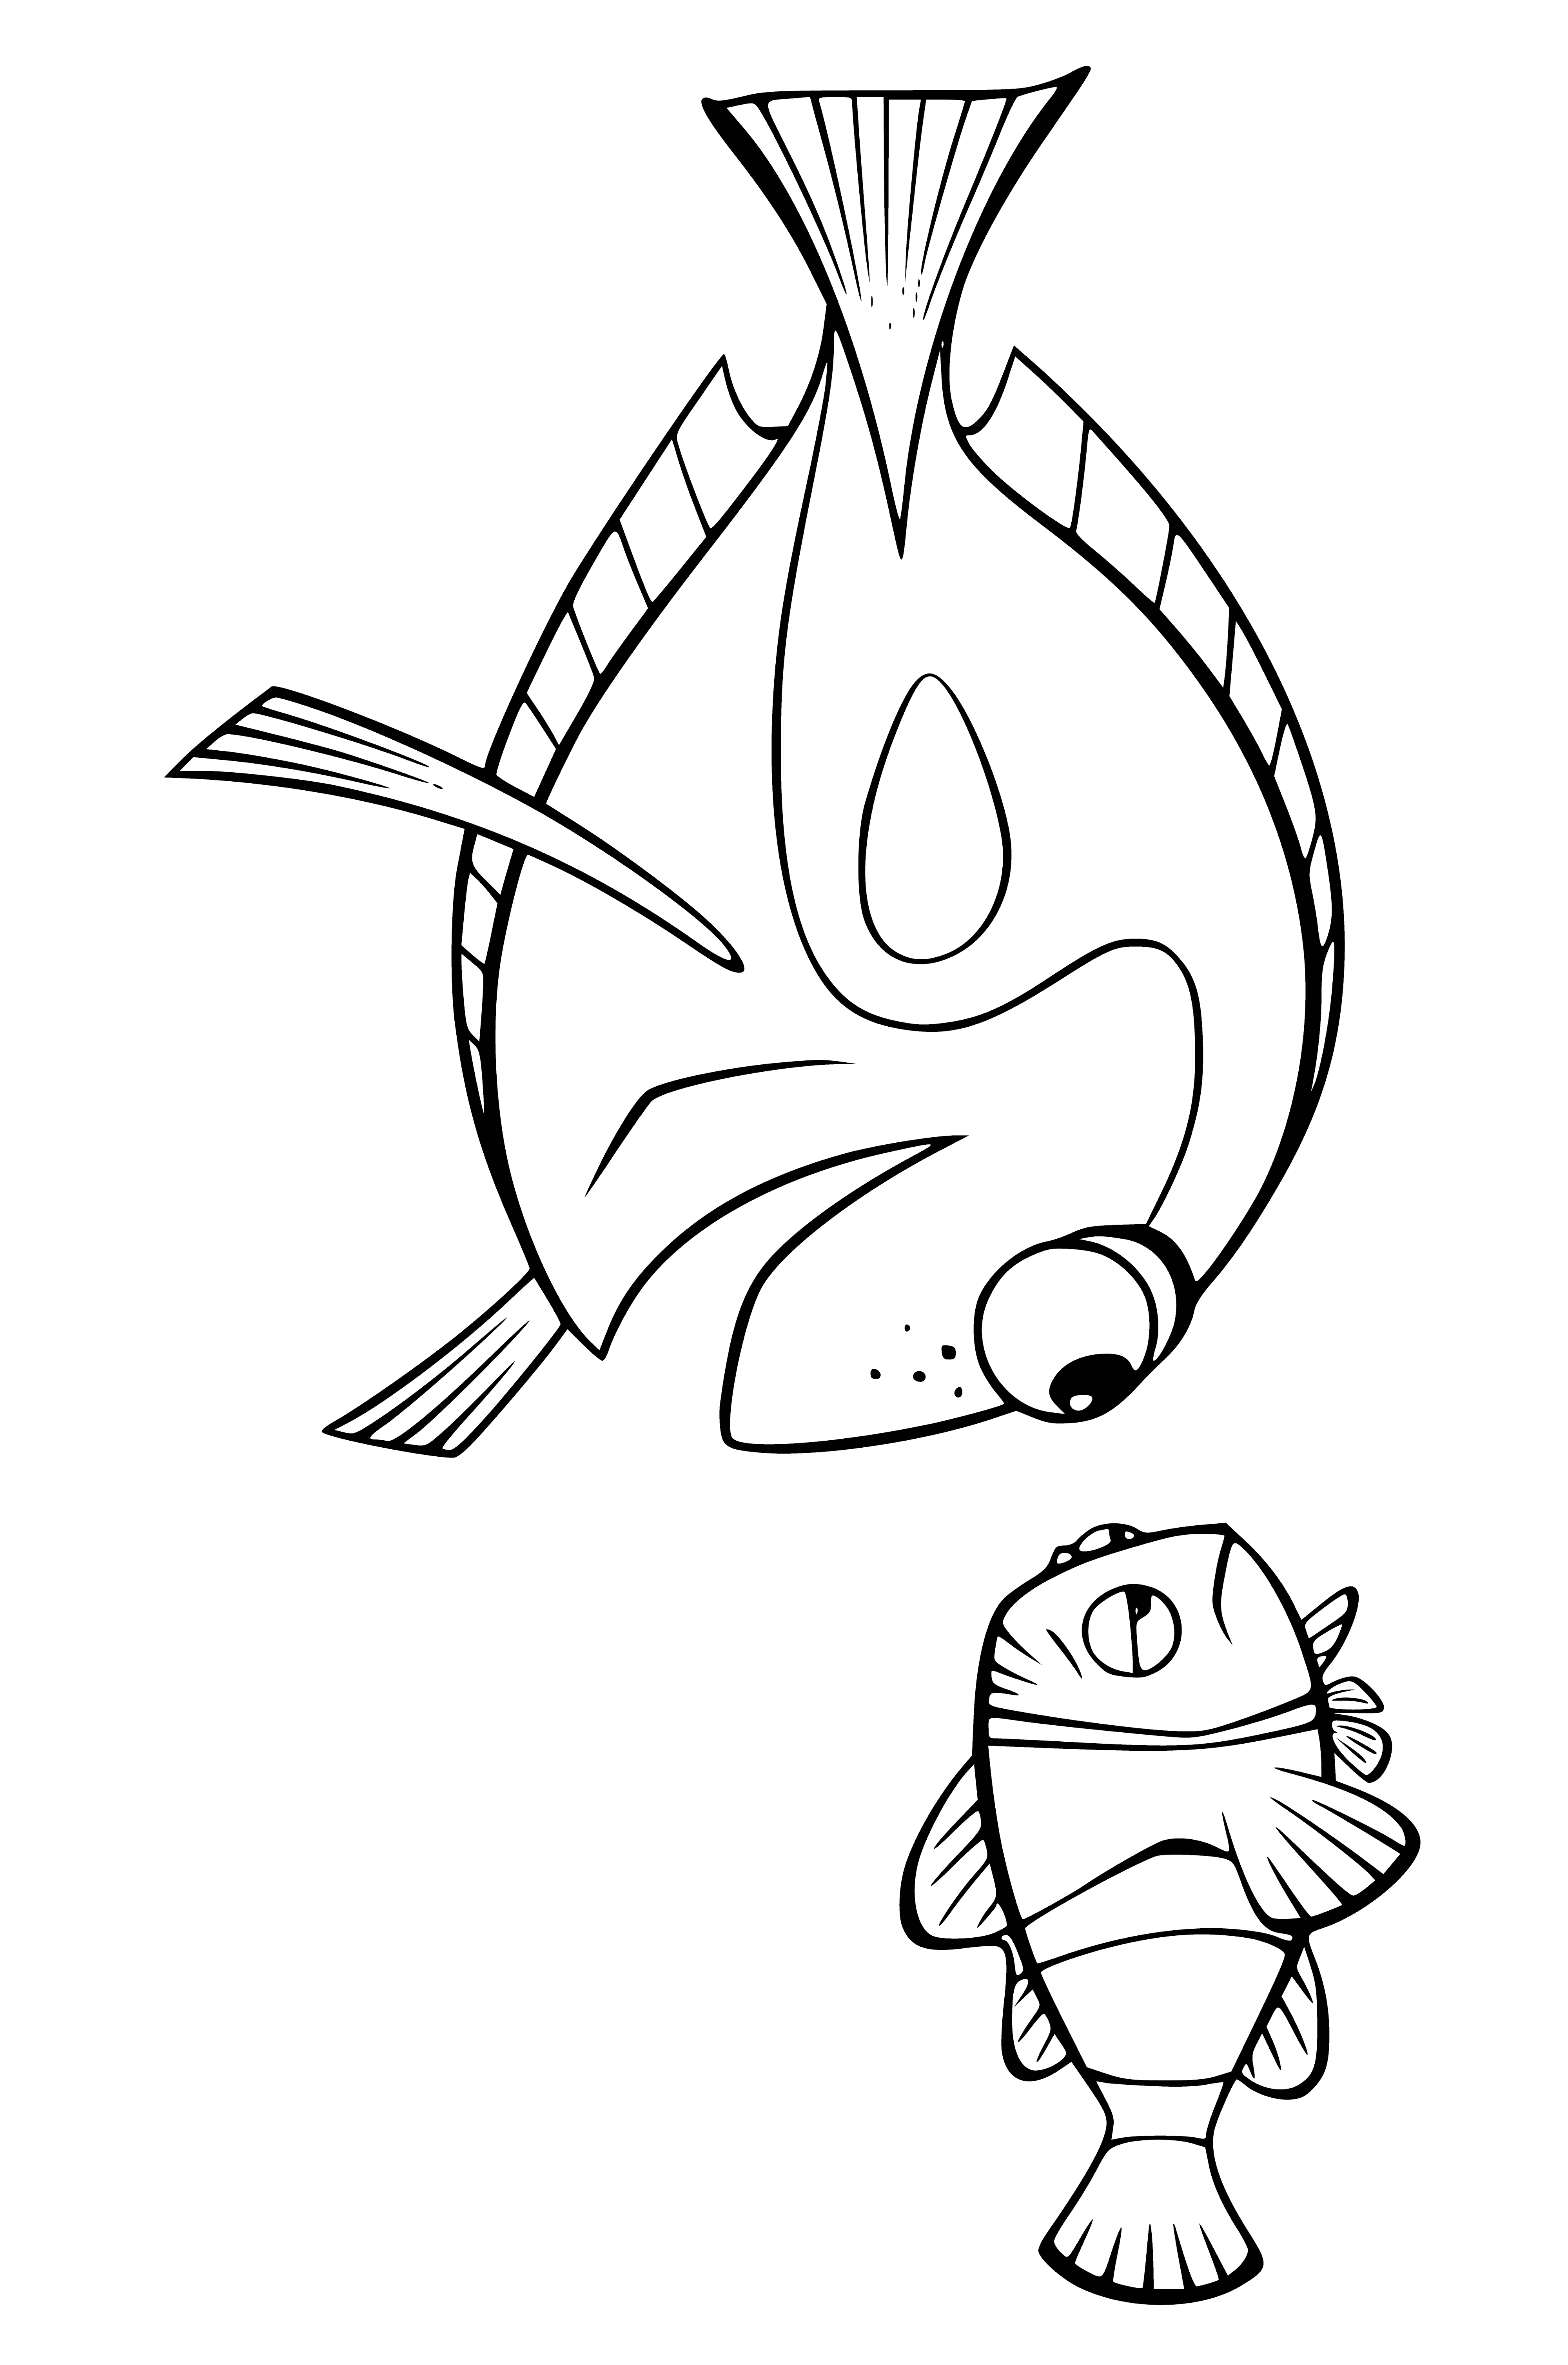 Fishes coloring page